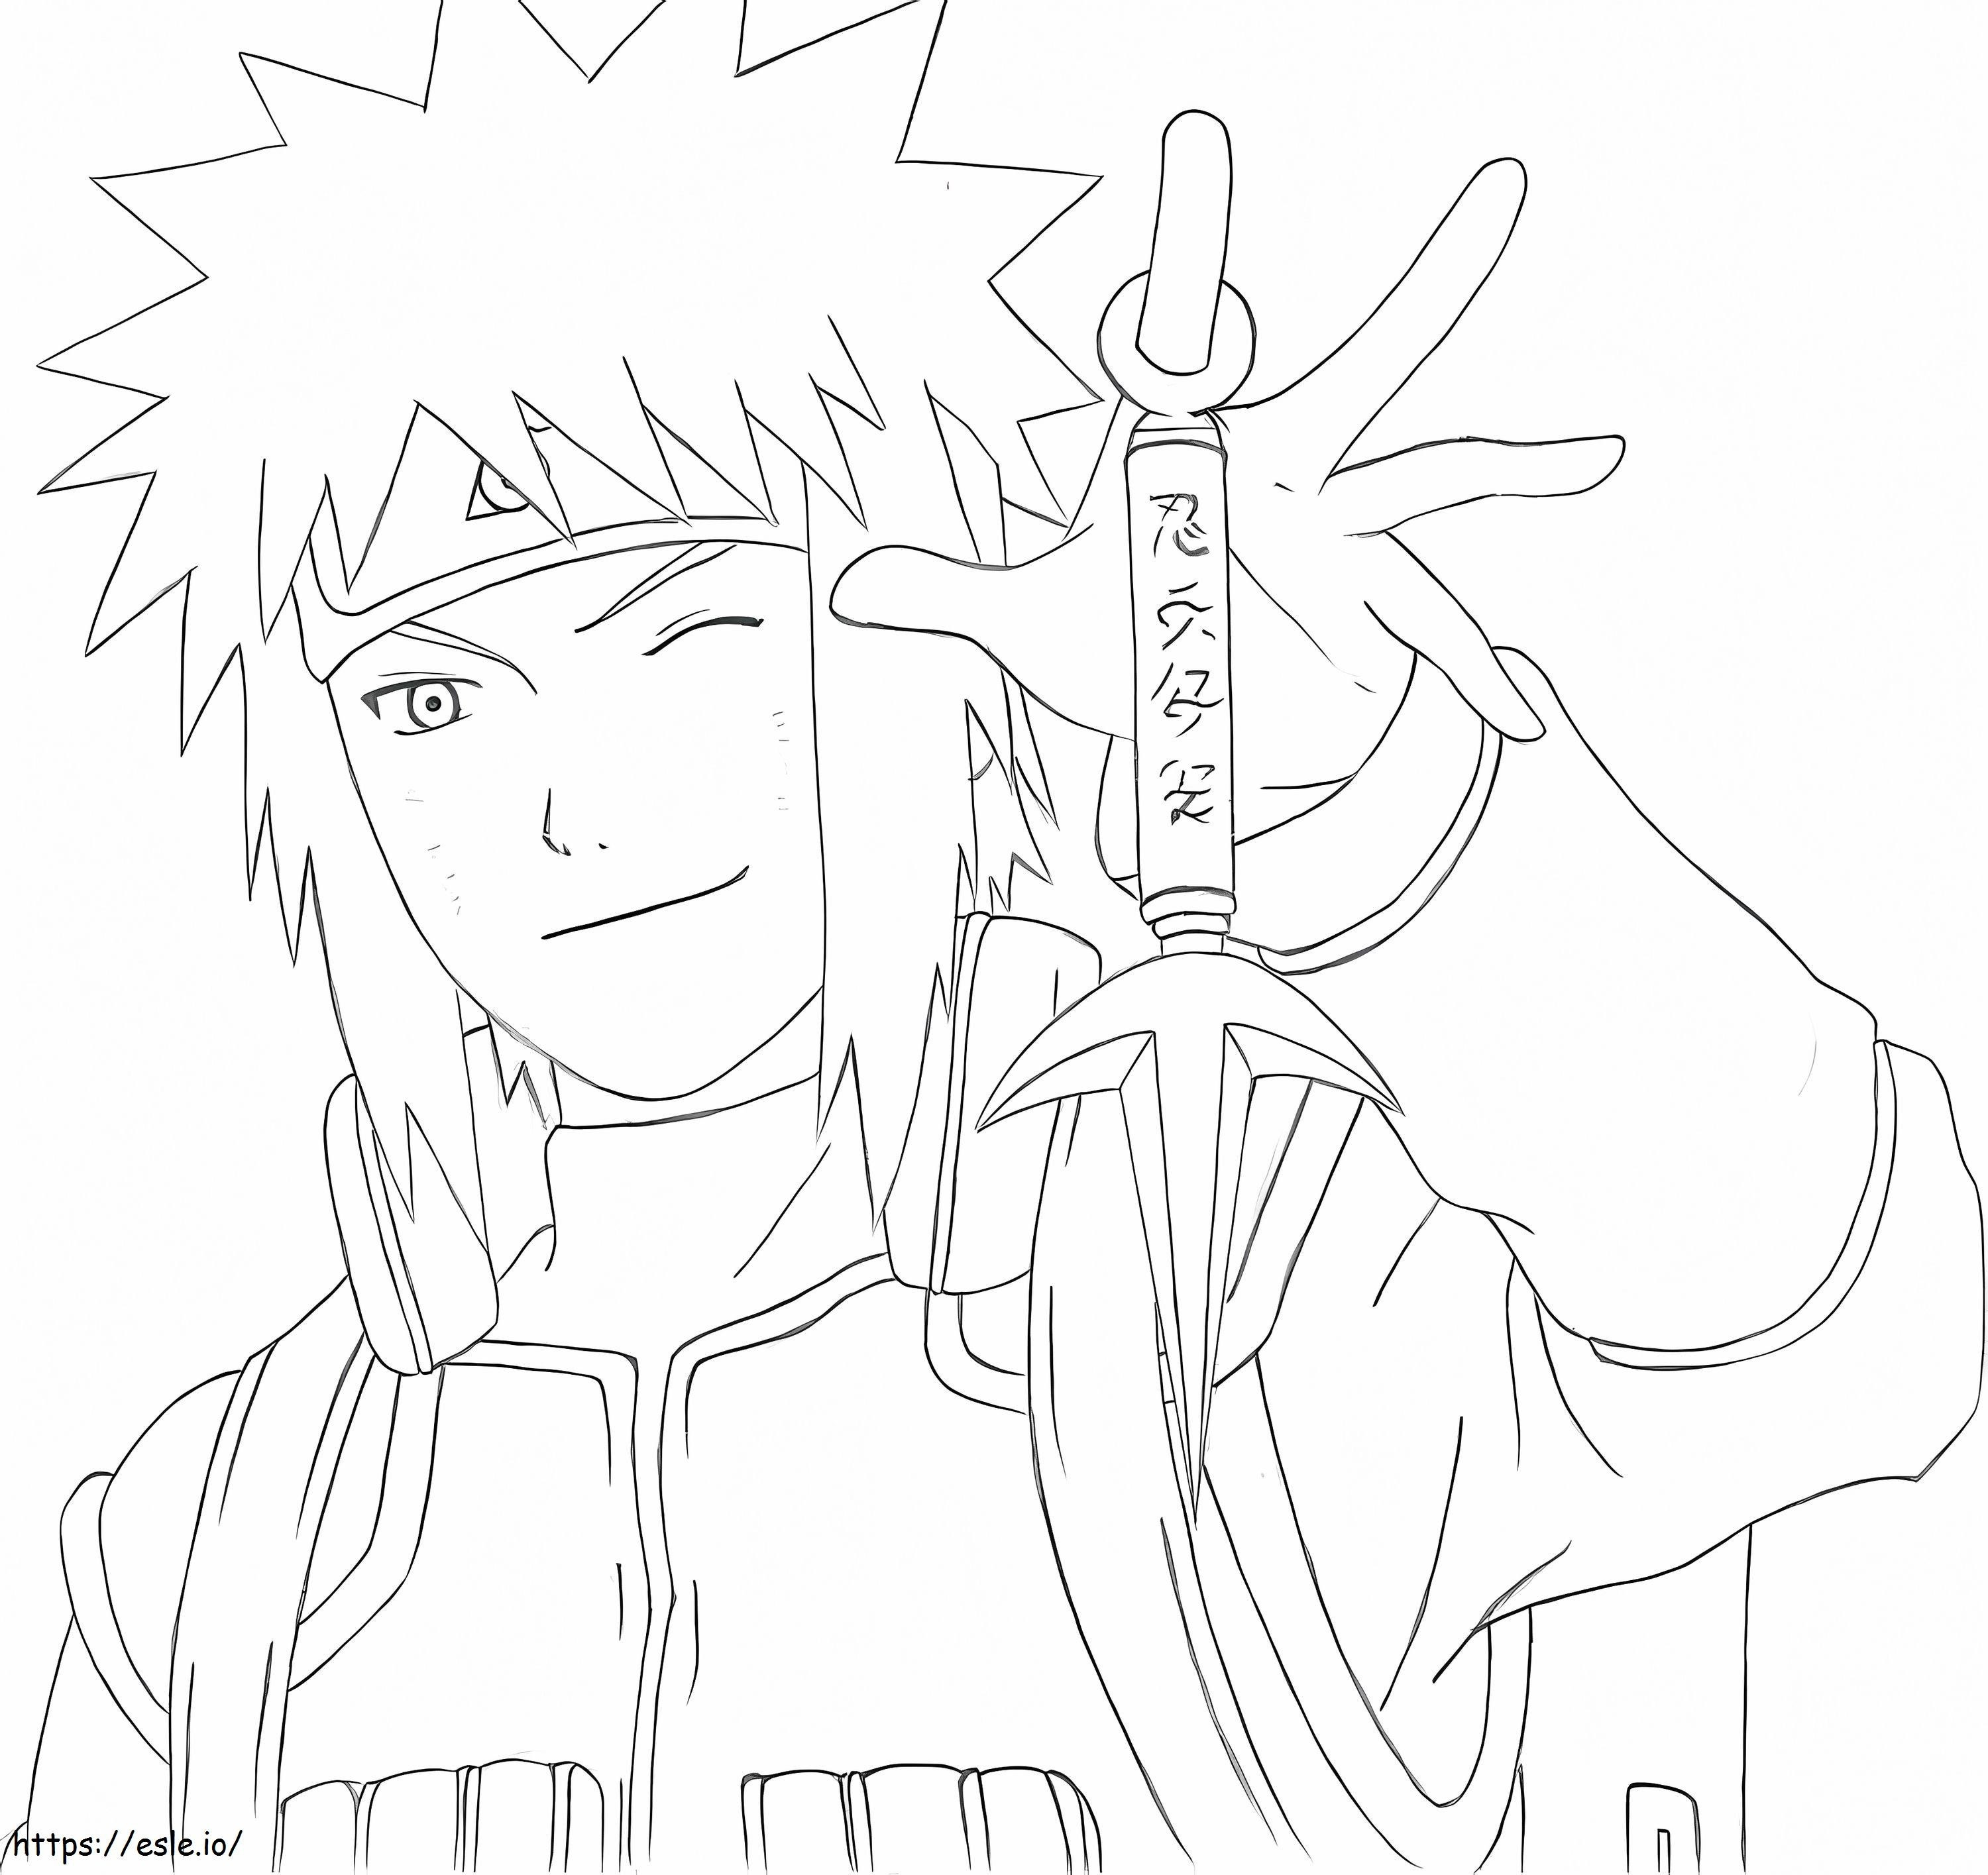 Minato Smiling Face coloring page